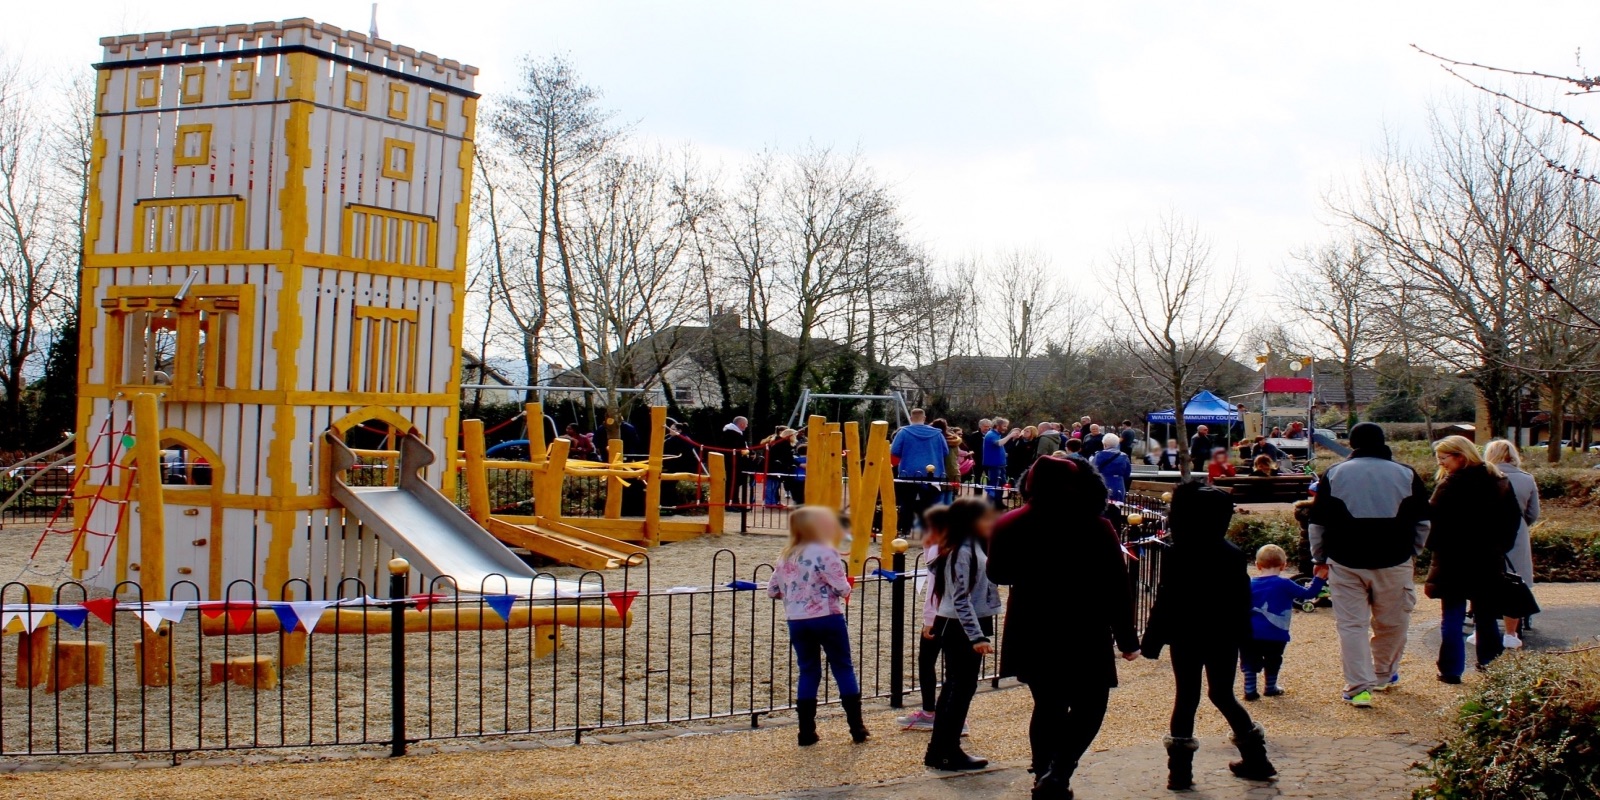 Opening Wavendon Gate Play Area